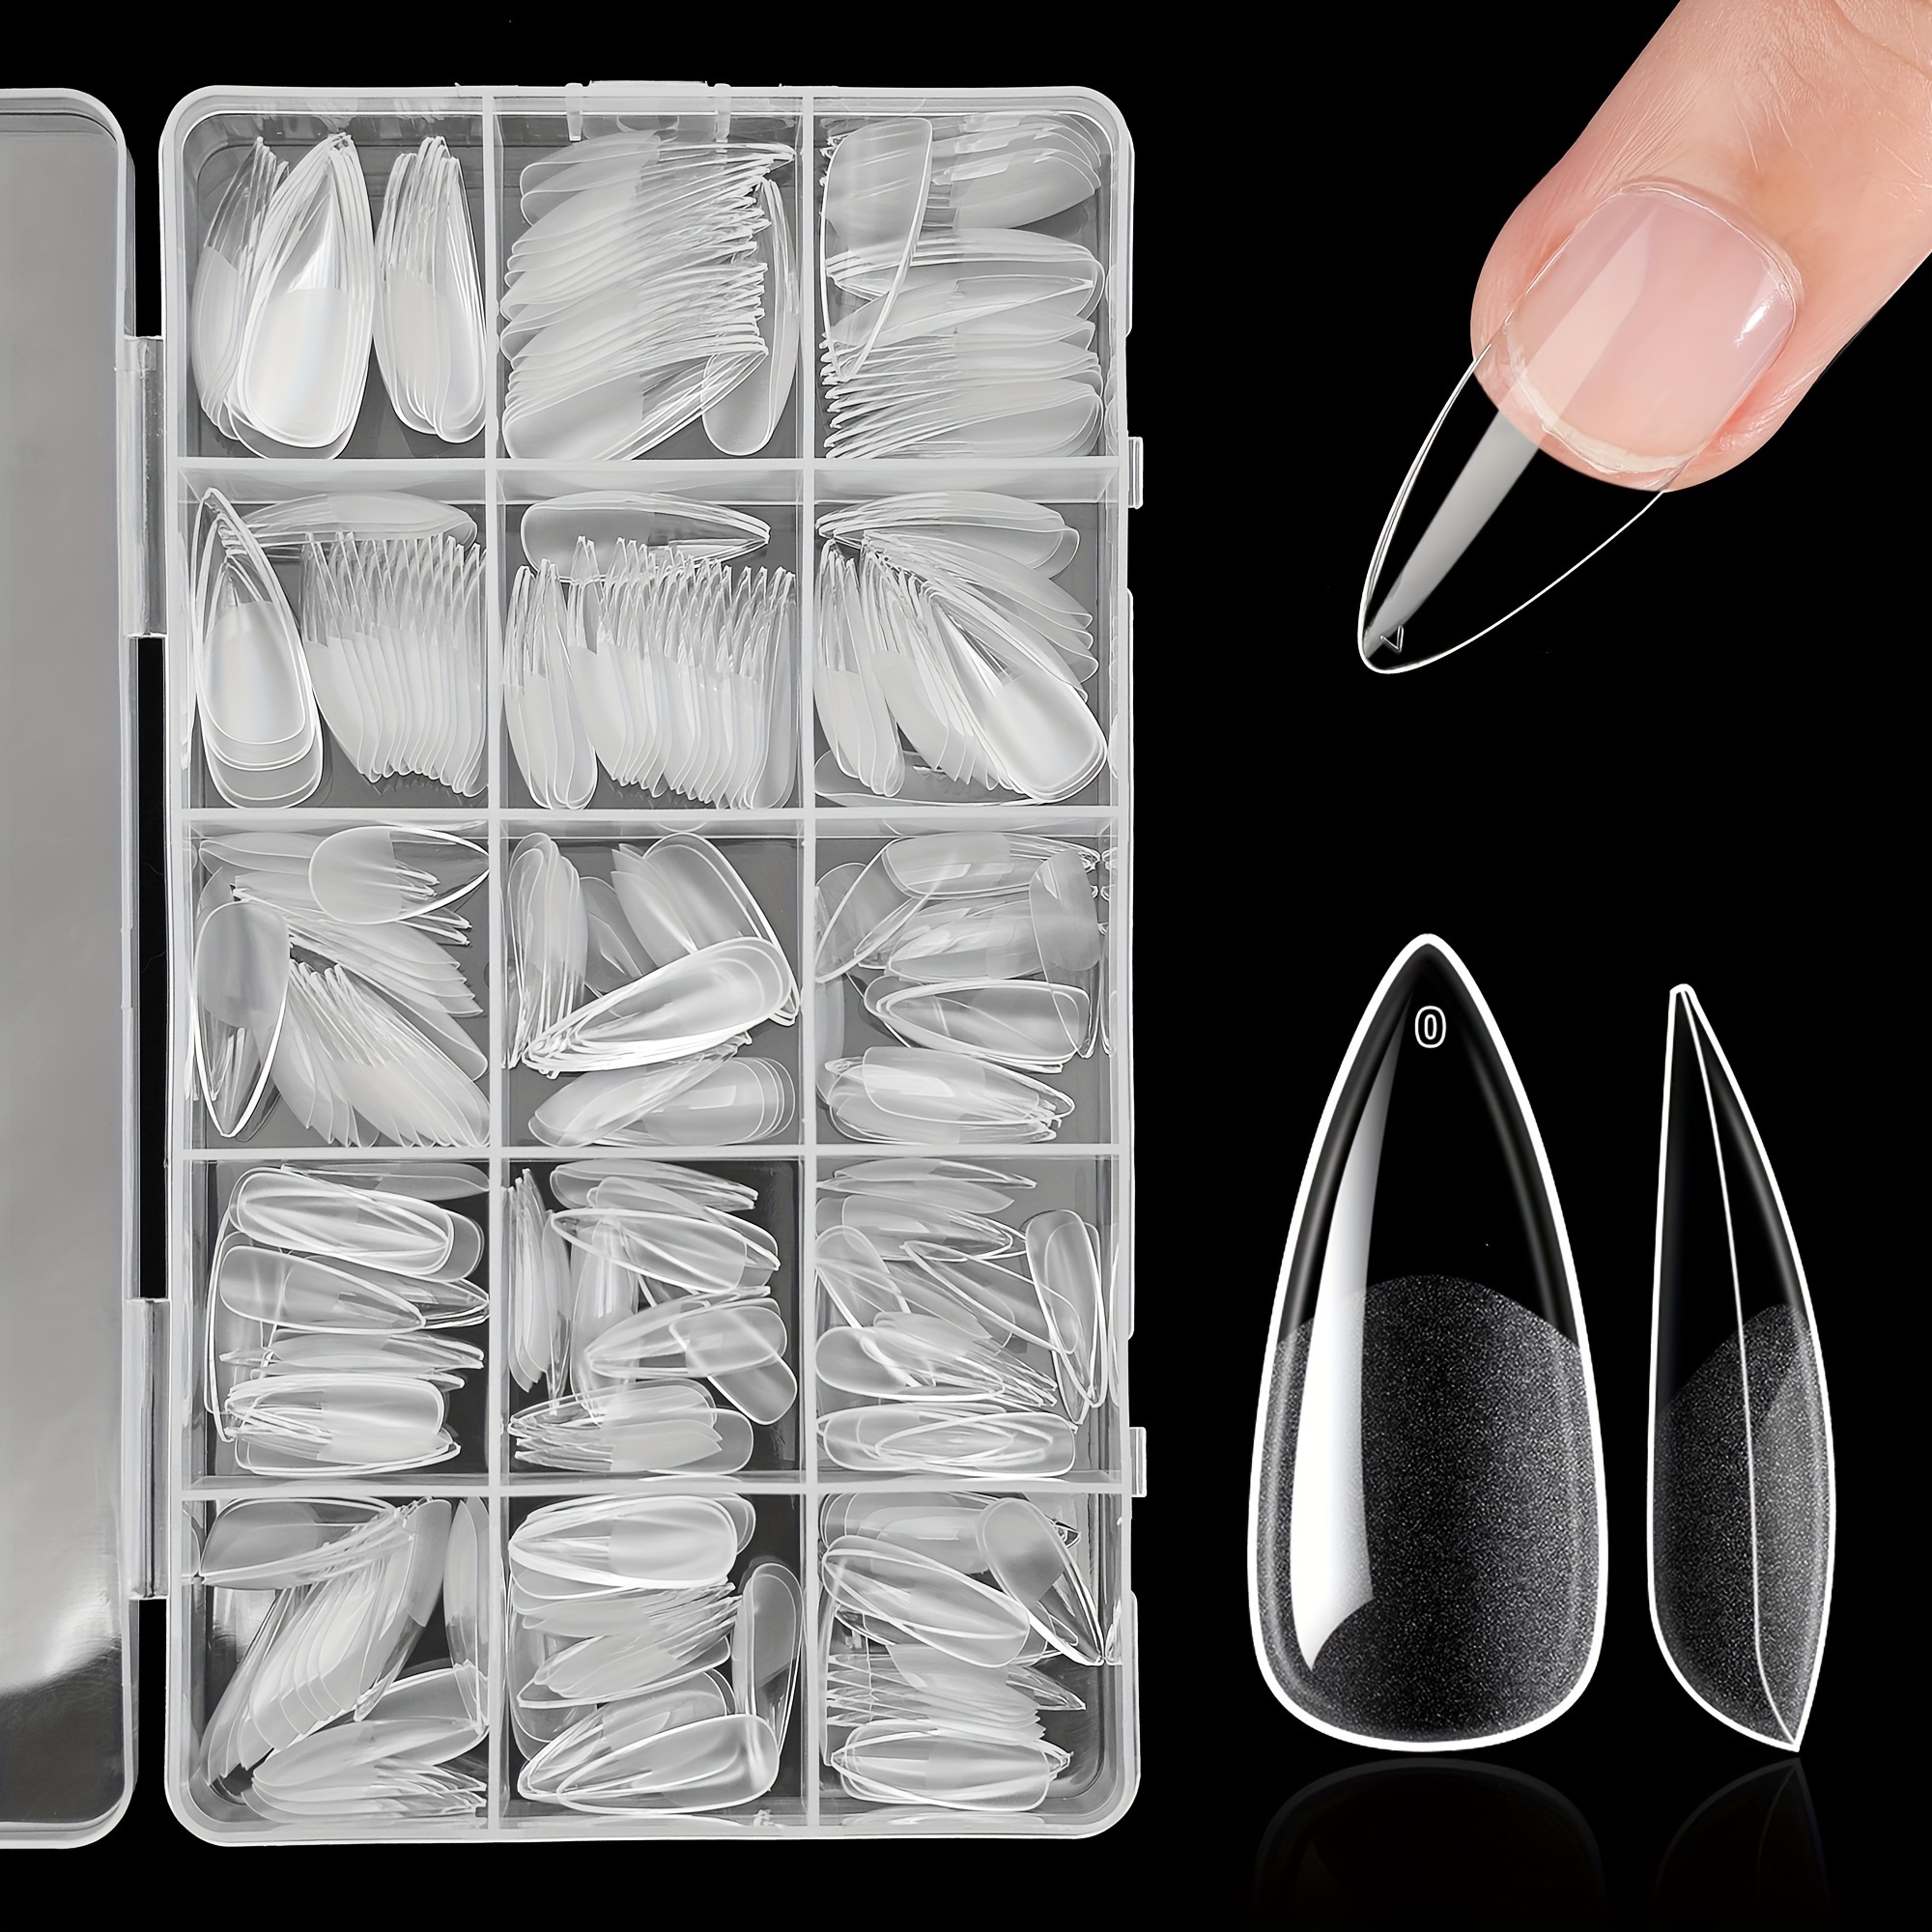 

330pcs/box Medium Stiletto Nails, 15 Sizes, Press-on Full/half Cover Pre-matte Gel Tips, Water Drop Shaped Clear Fake Nails For Nail Extensions, Home Nail Art & Salon Use